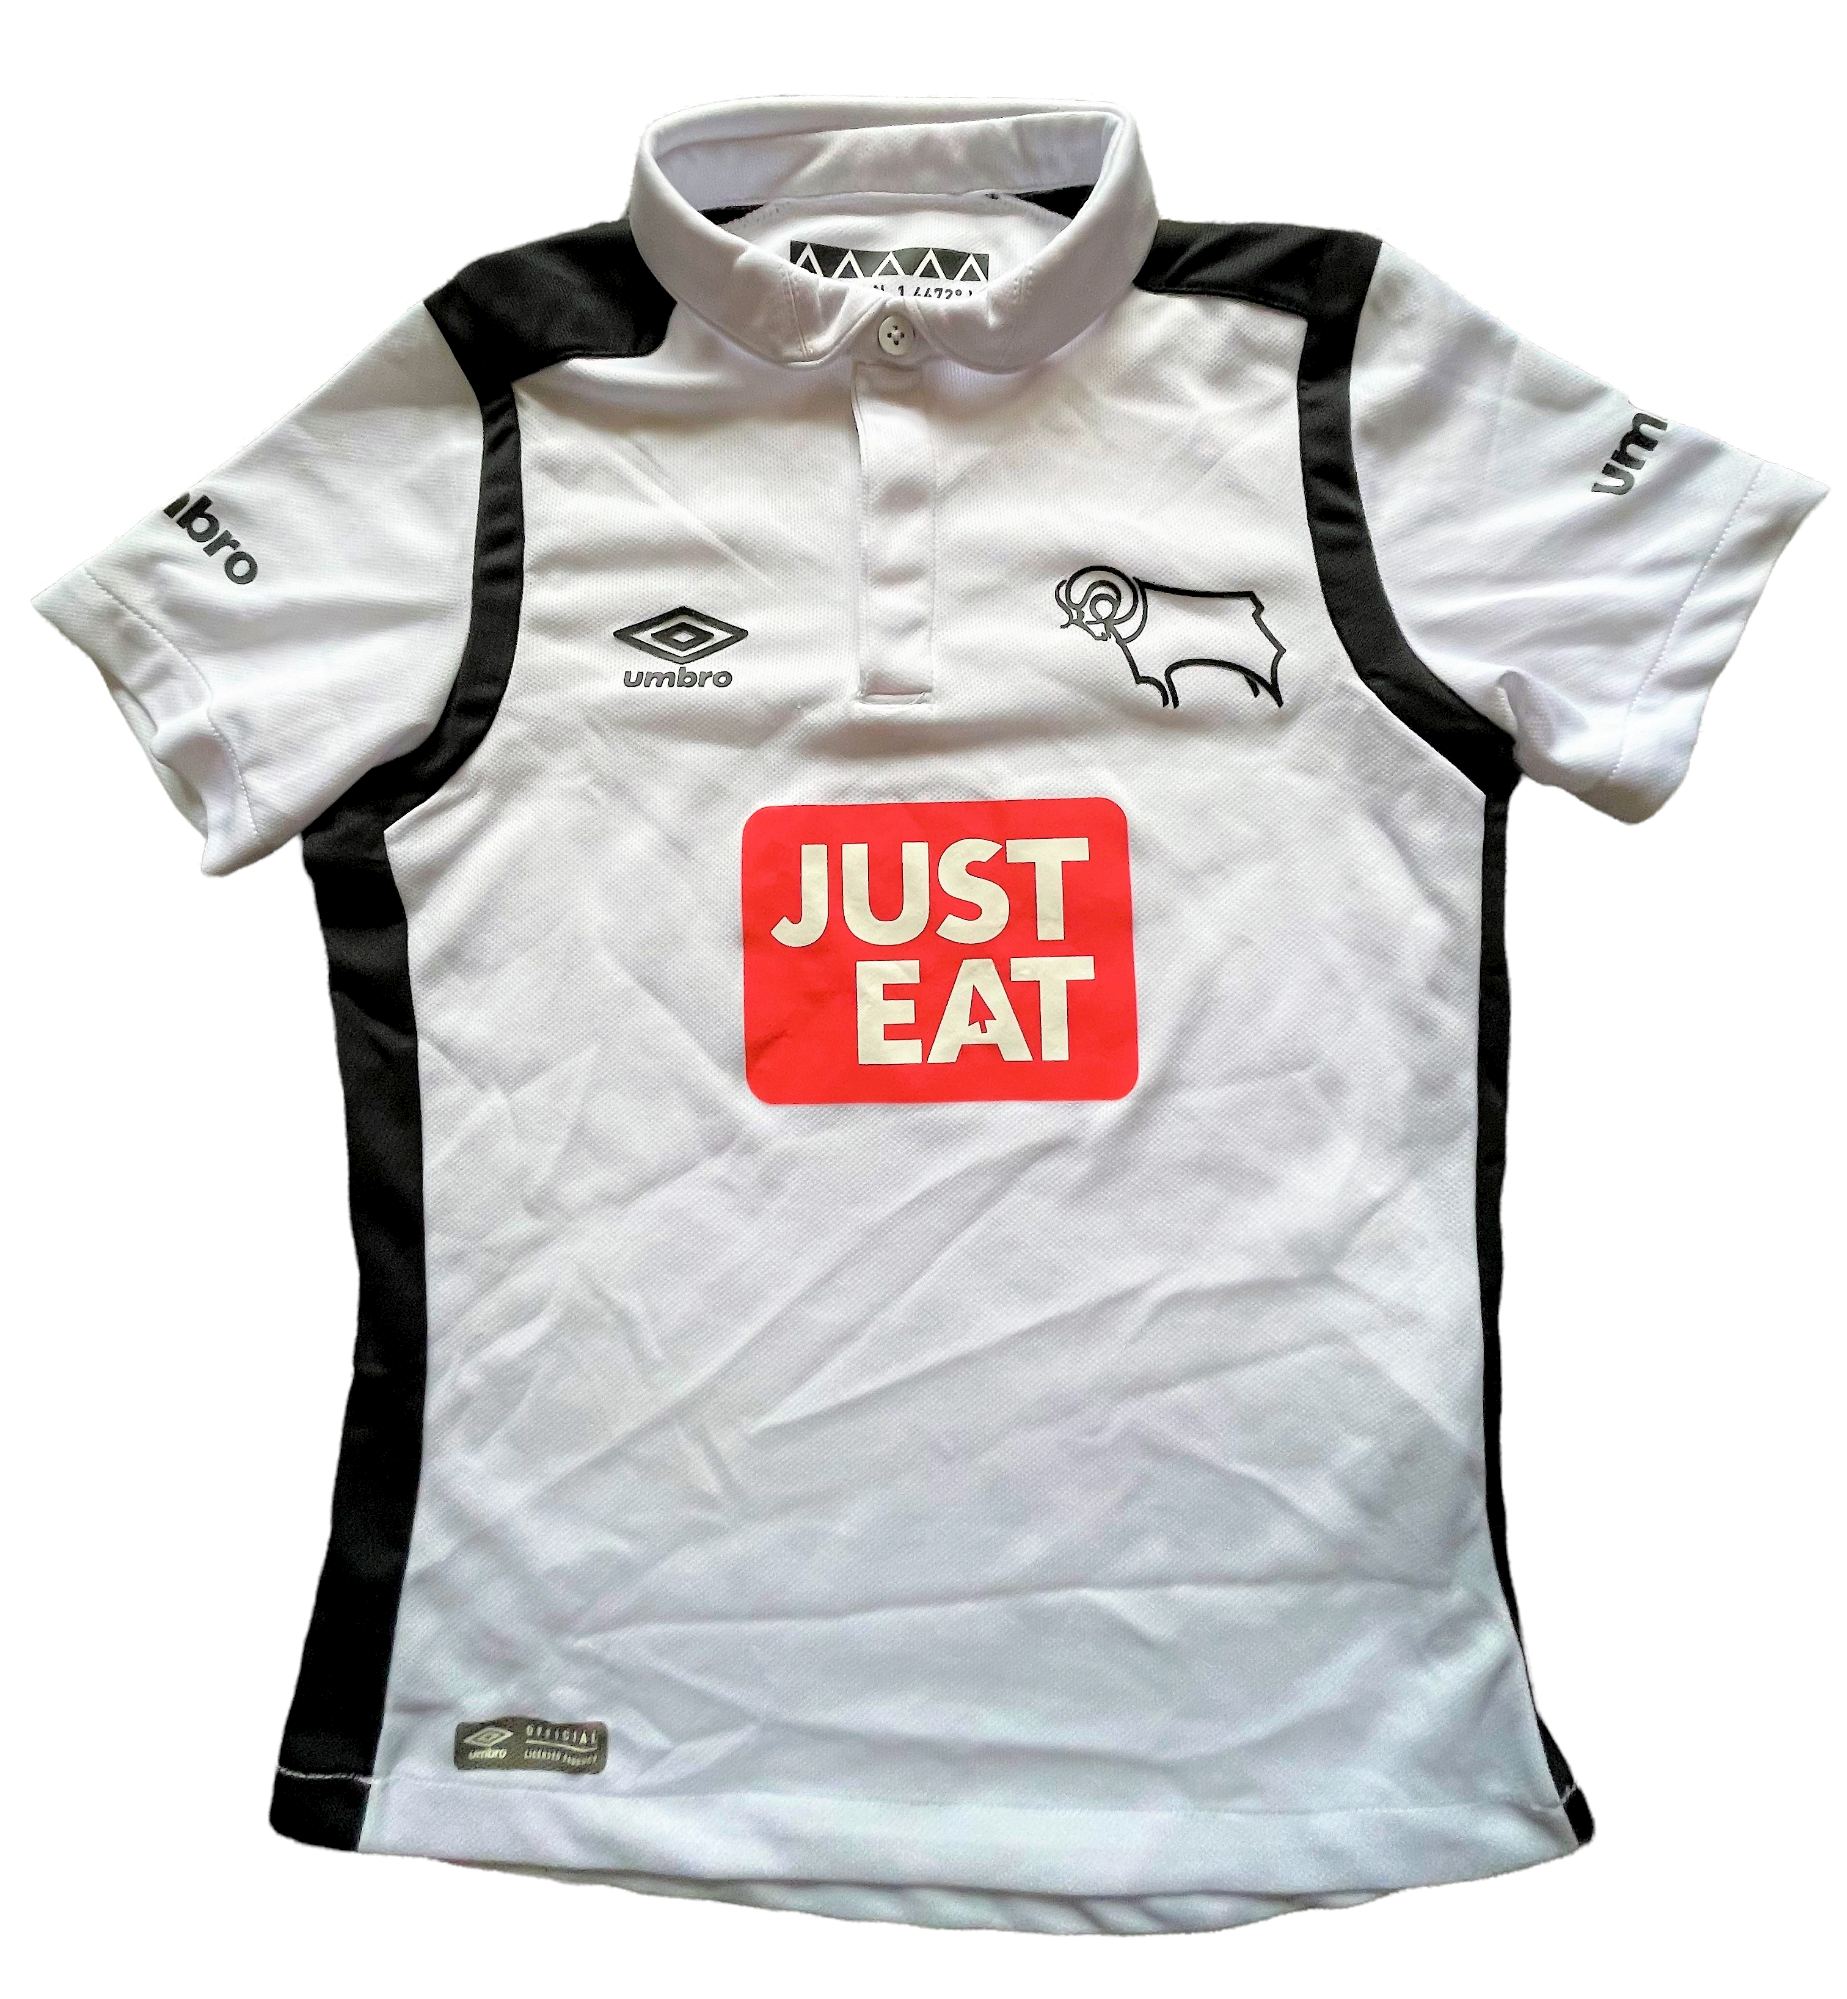 2016-17 Derby County Home Shirt (excellent) Small Boys